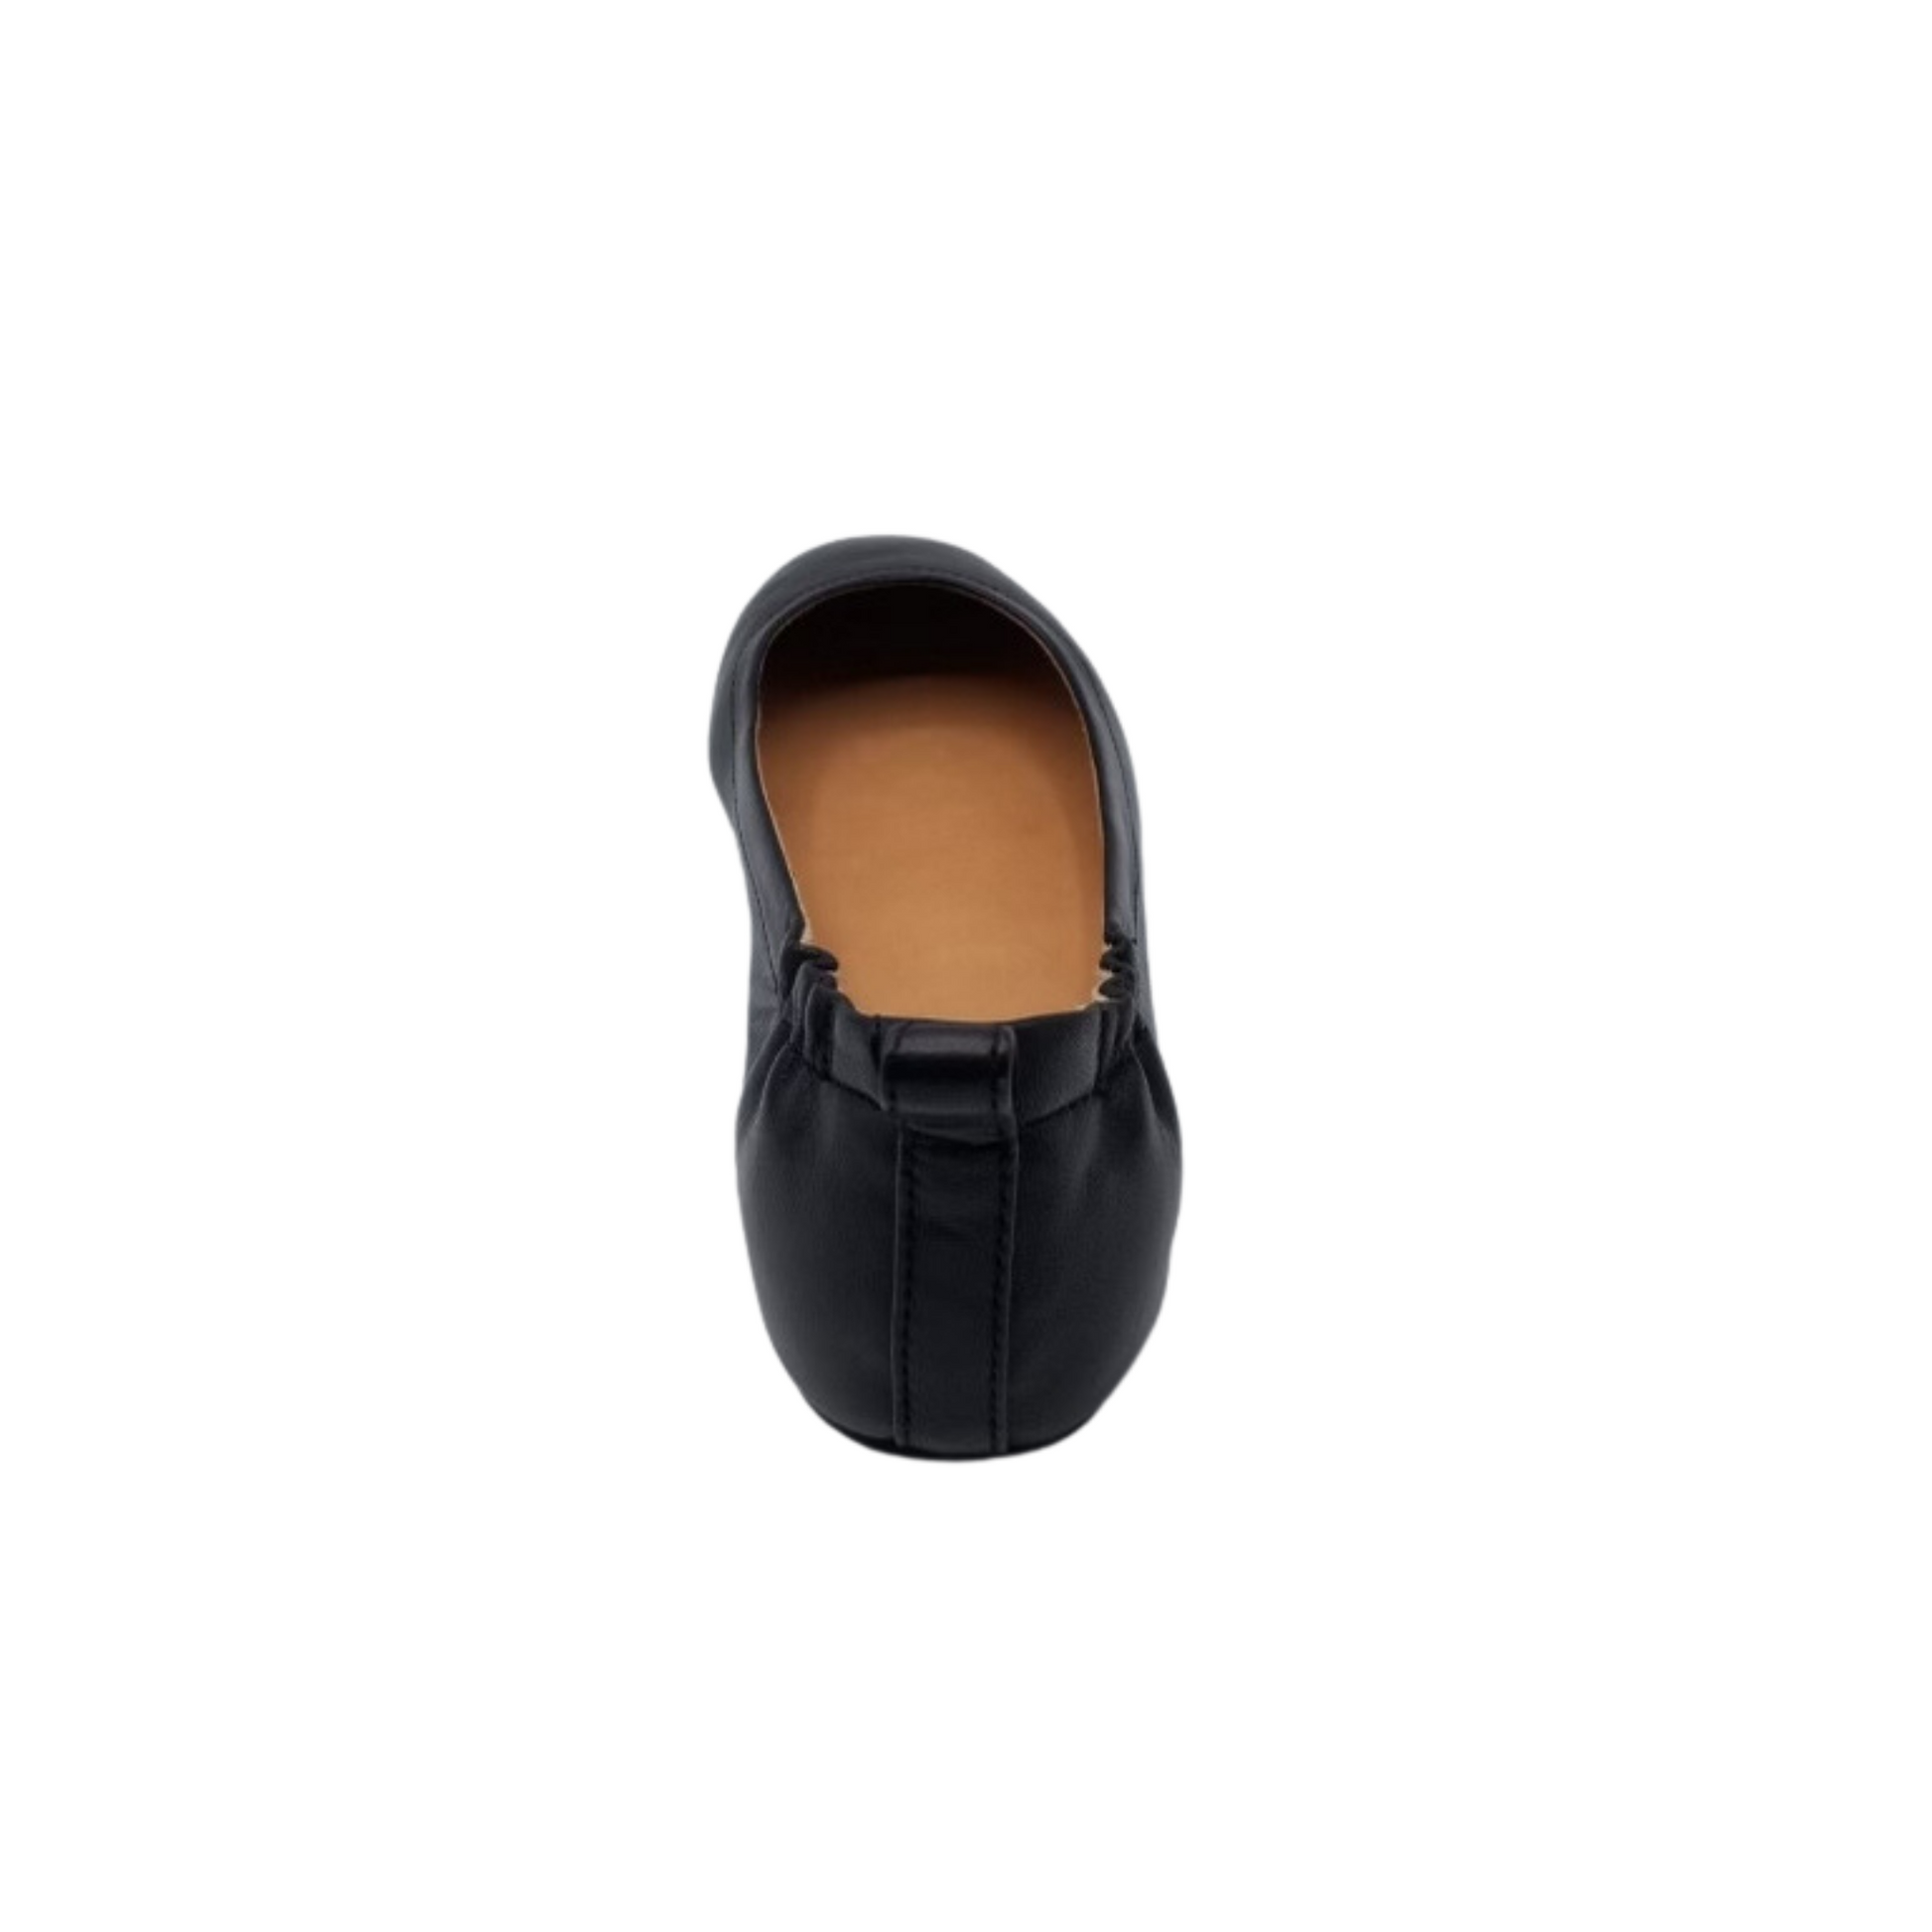 The Allegro Ballet Flat features a low-profile design for convenient slip-on access.